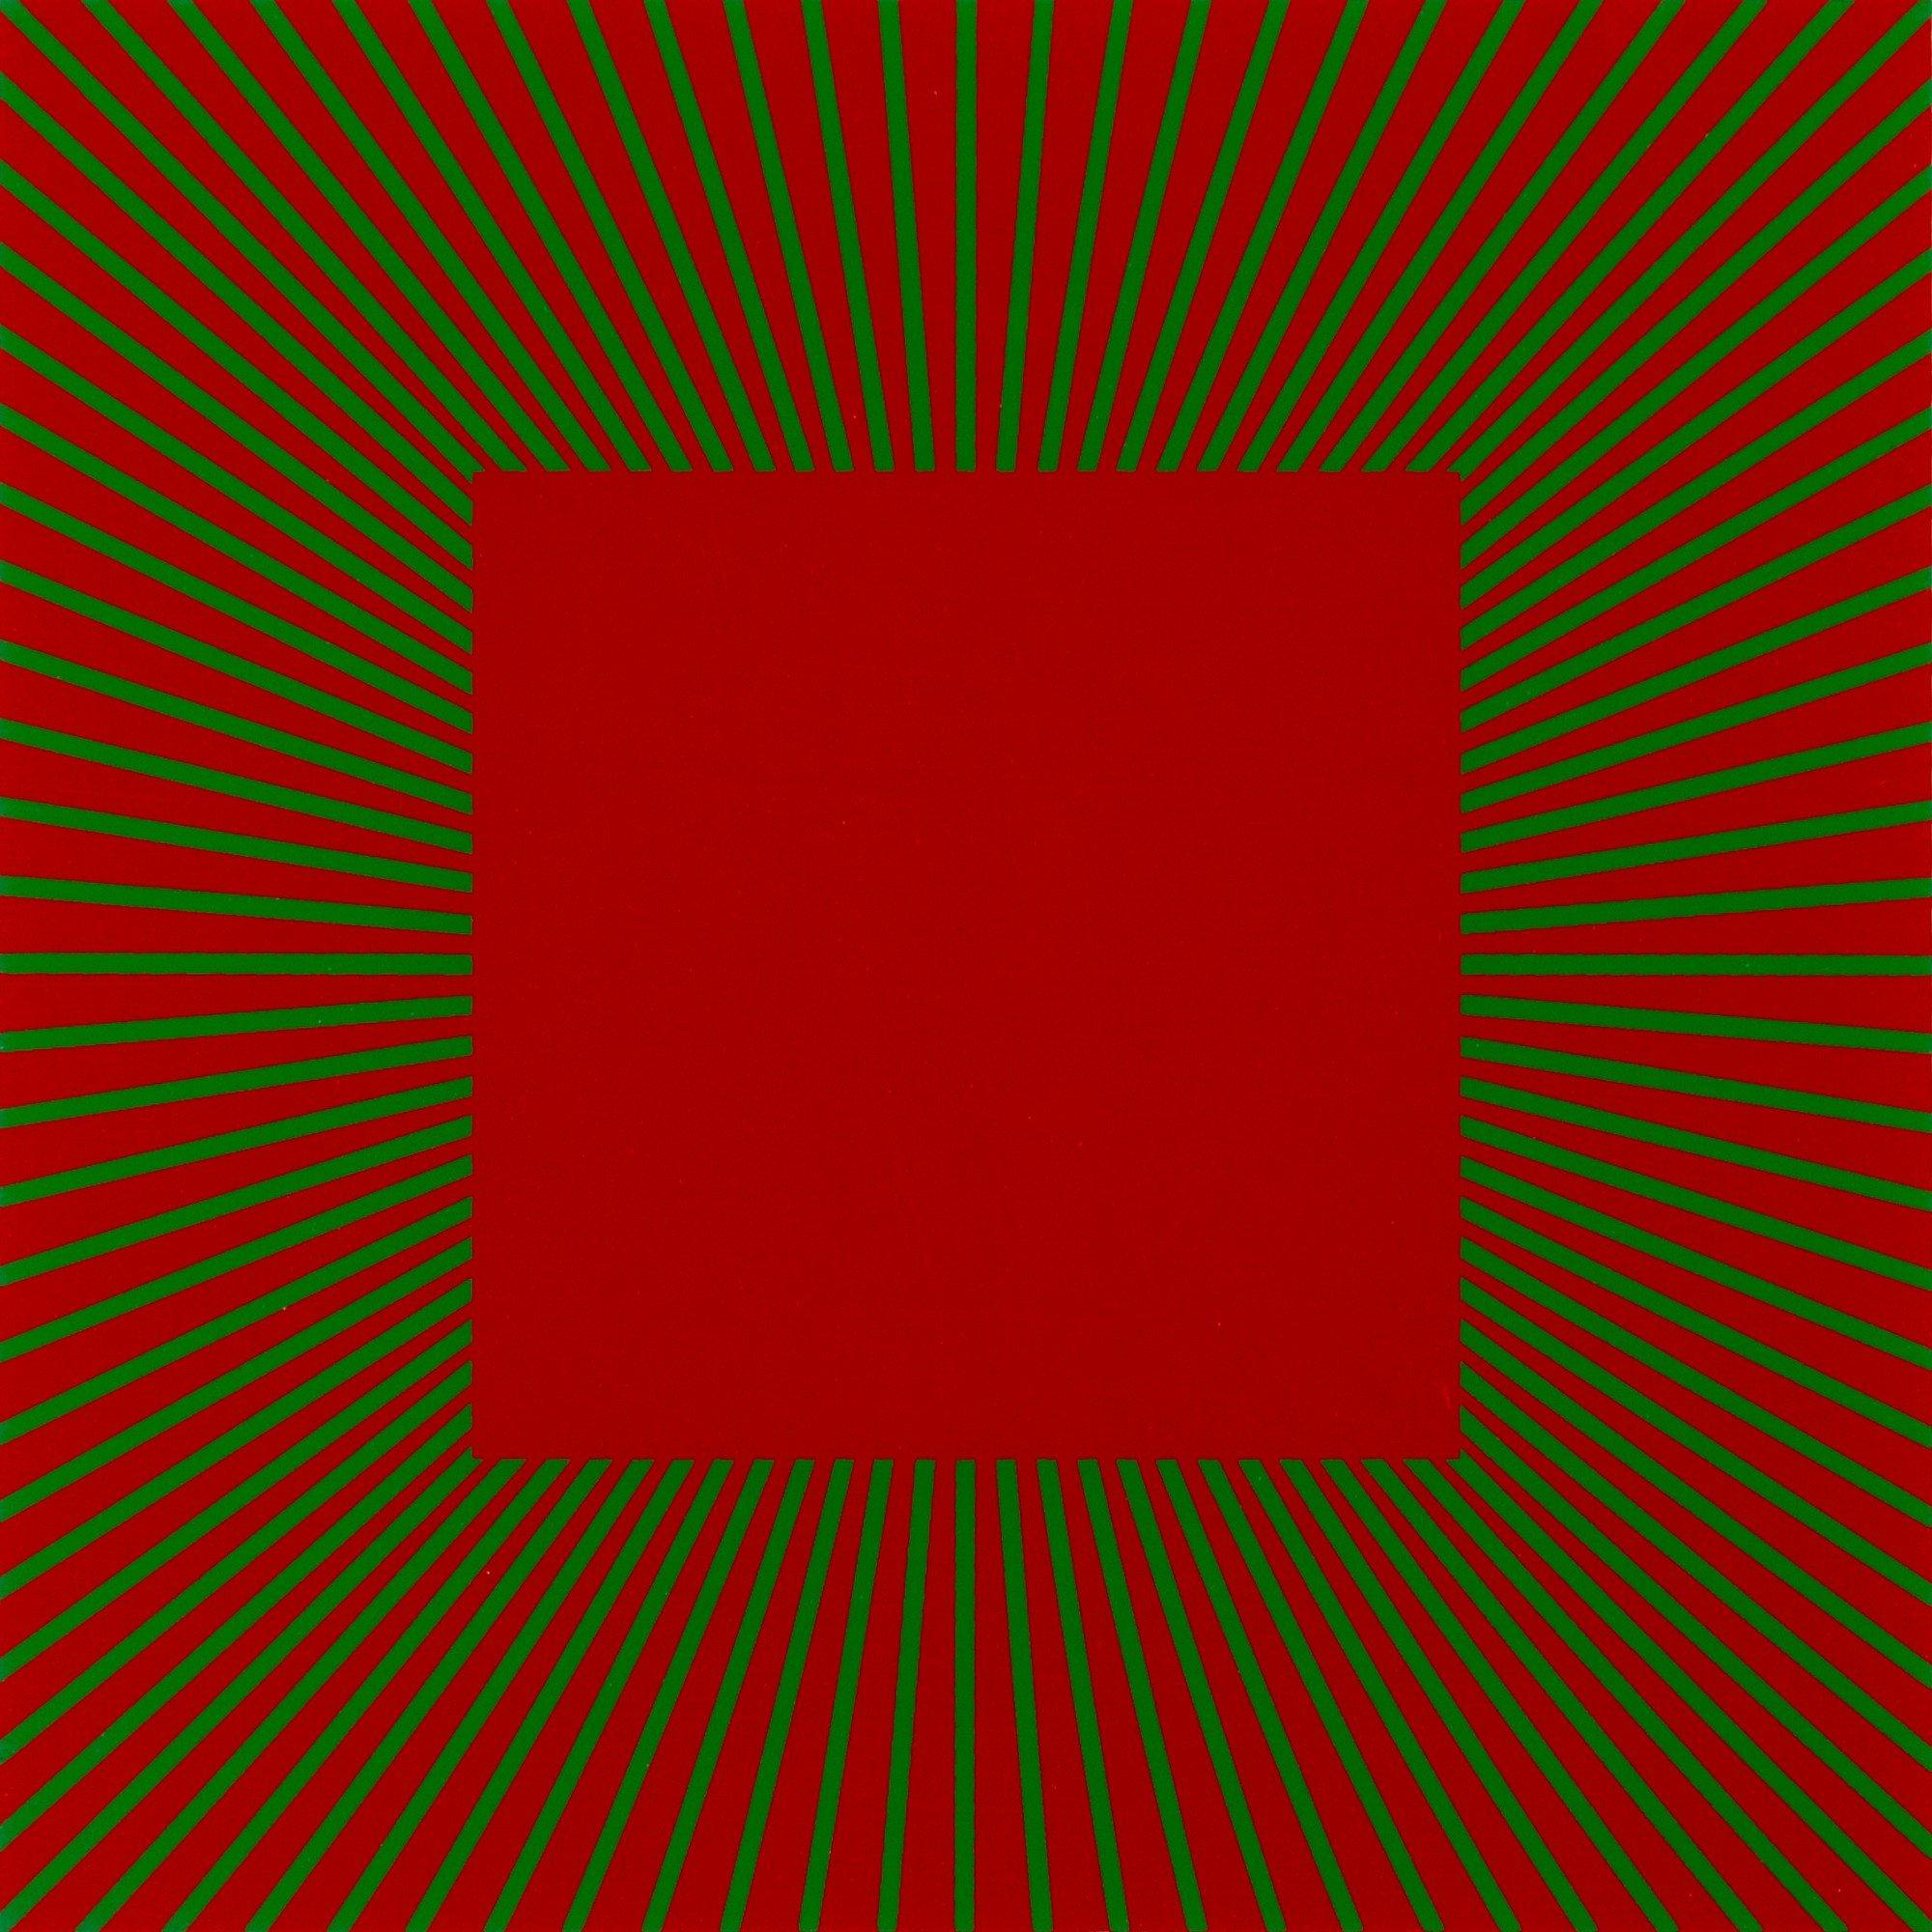 Red with Green, 1990 print by OpArt Cleveland artist Richard Anuszkiewicz 